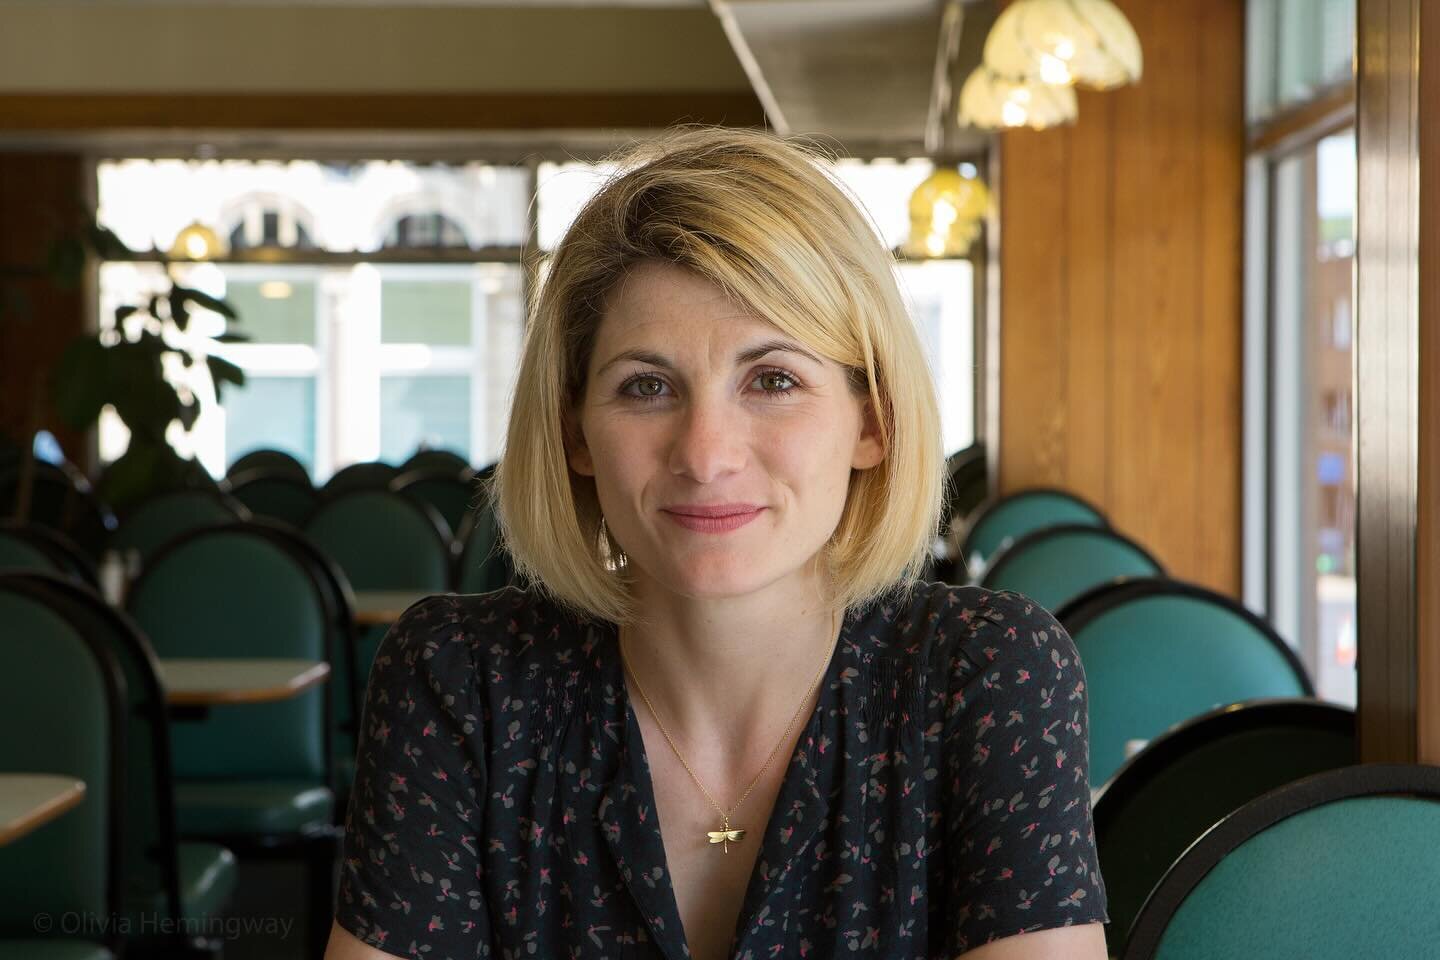 Saw the amazing BBC drama Time (S2) and was inspired to revisit this shoot. Here&rsquo;s a previously unseen image of Jodie Whittaker smiling to camera with such warmth - what a joy it was to photograph her (plus we had a funny time eavesdropping on 